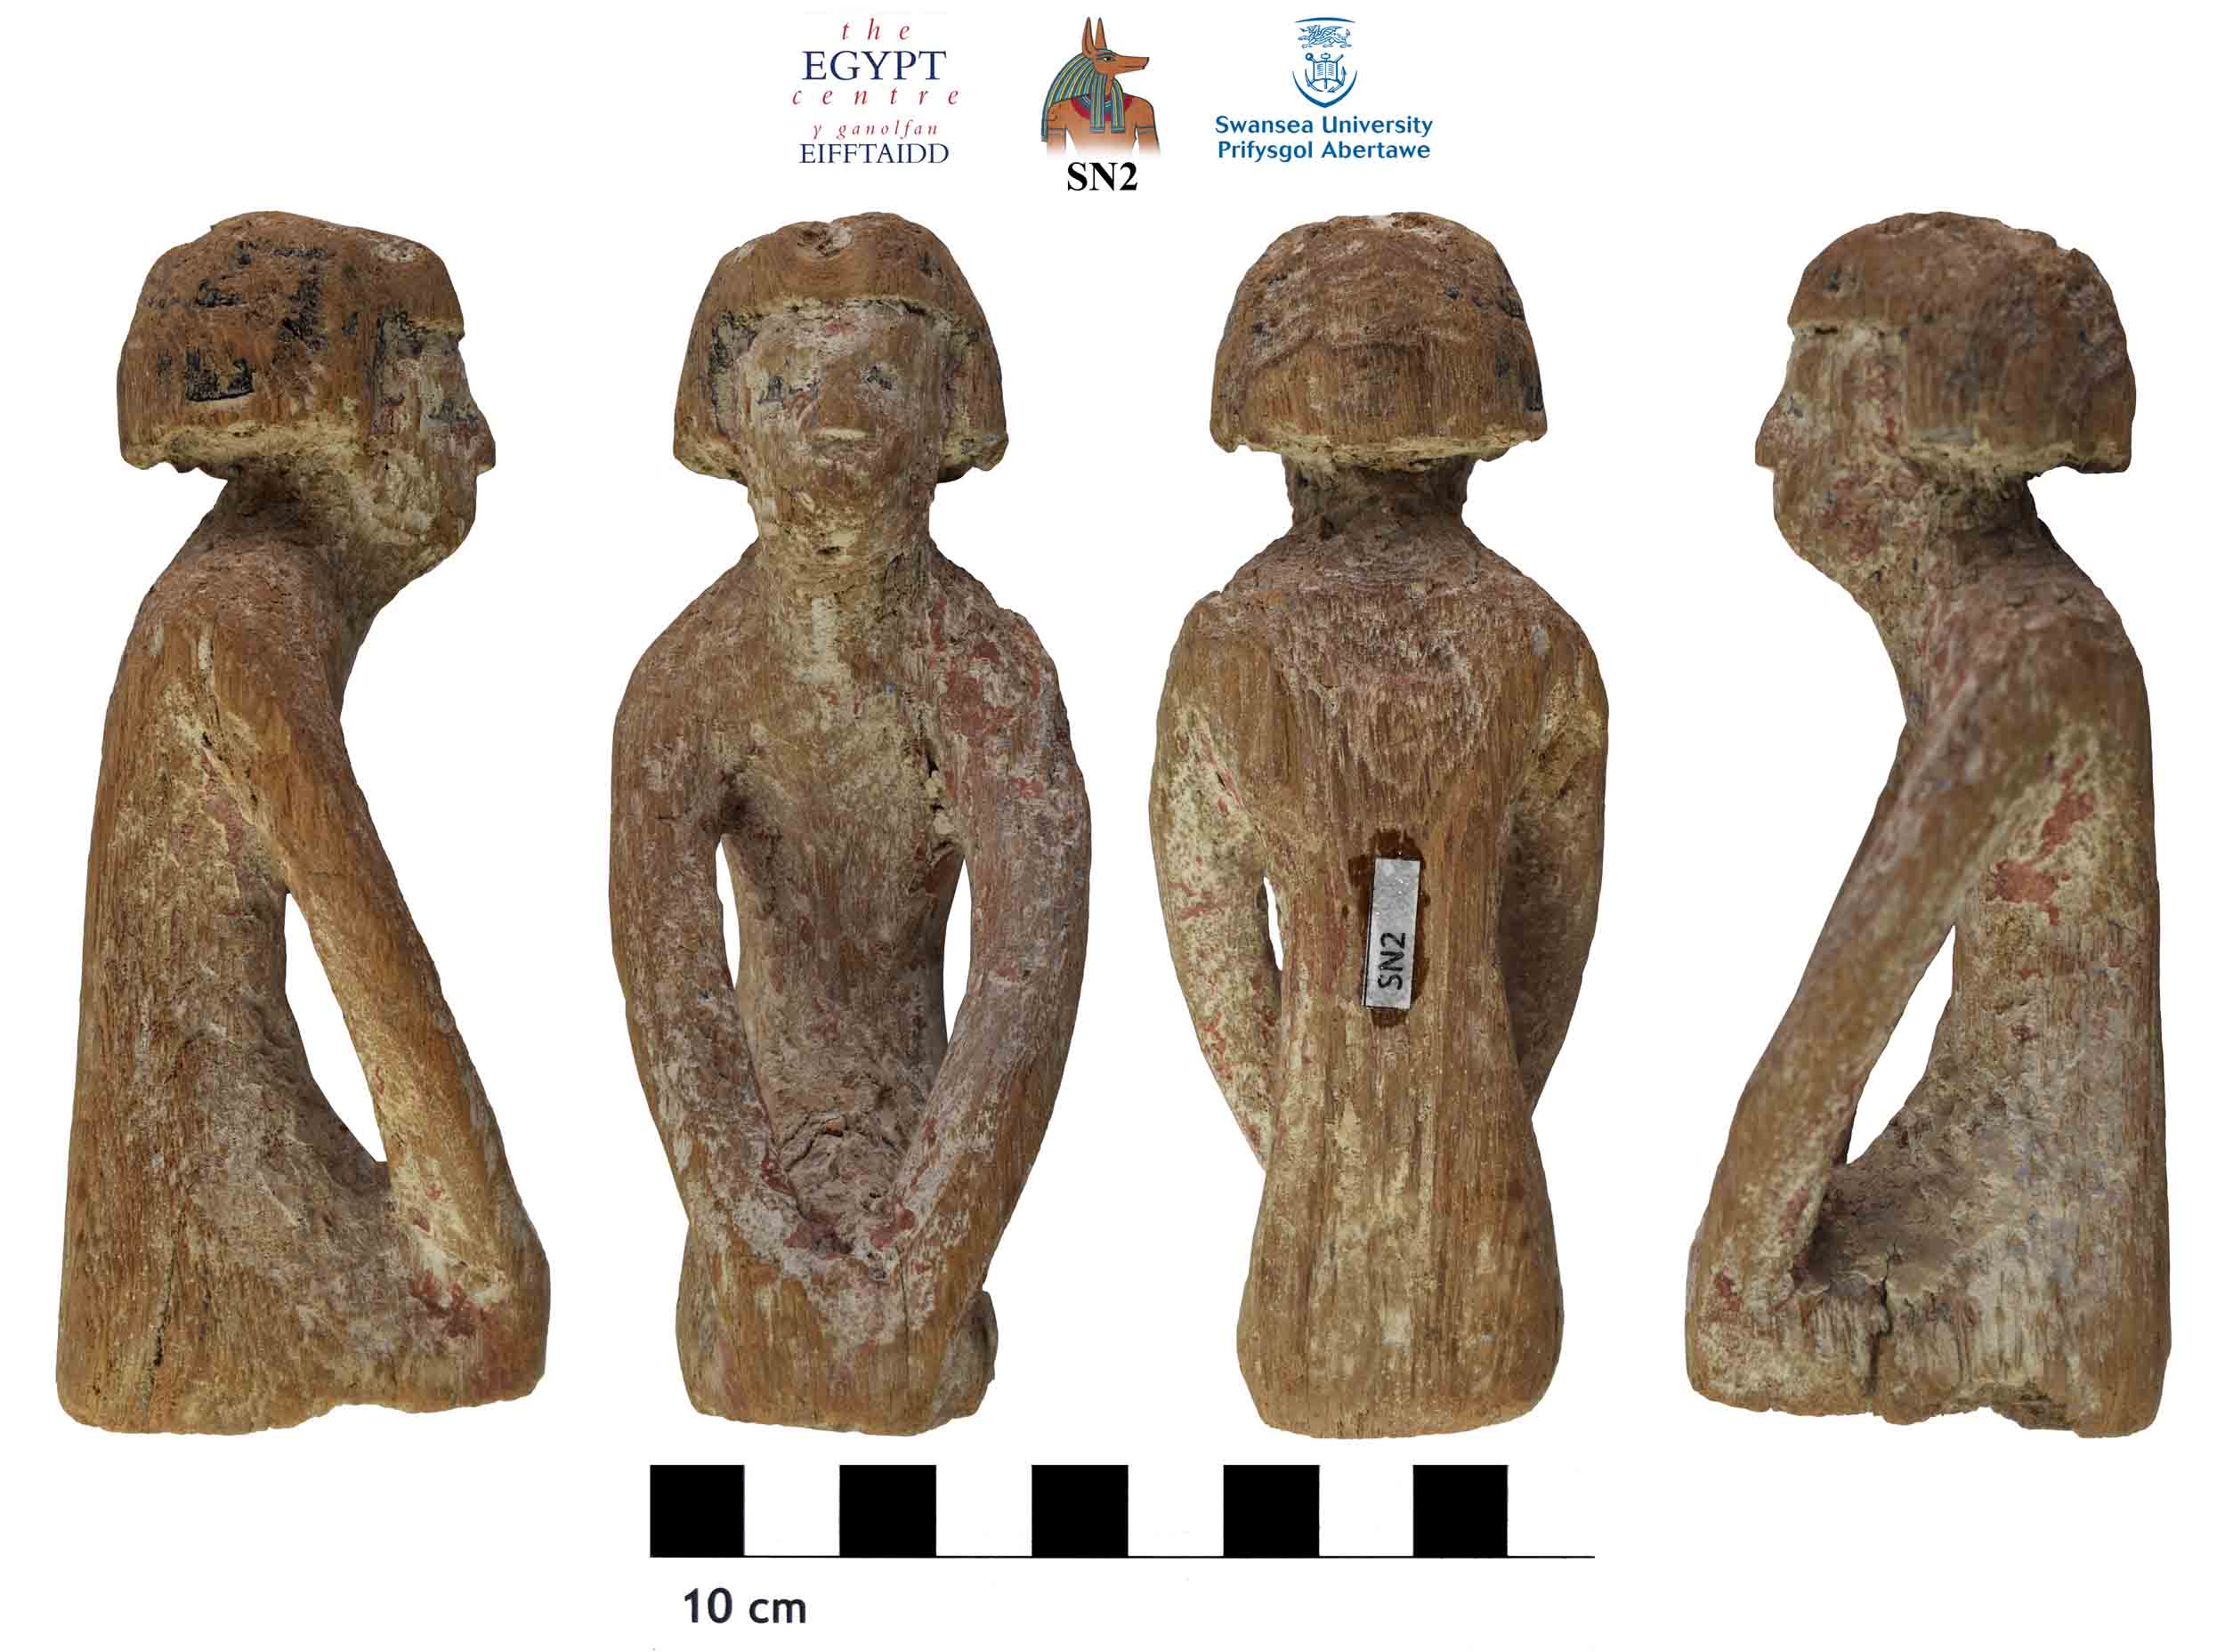 Image for: Wooden figure from a funerary model